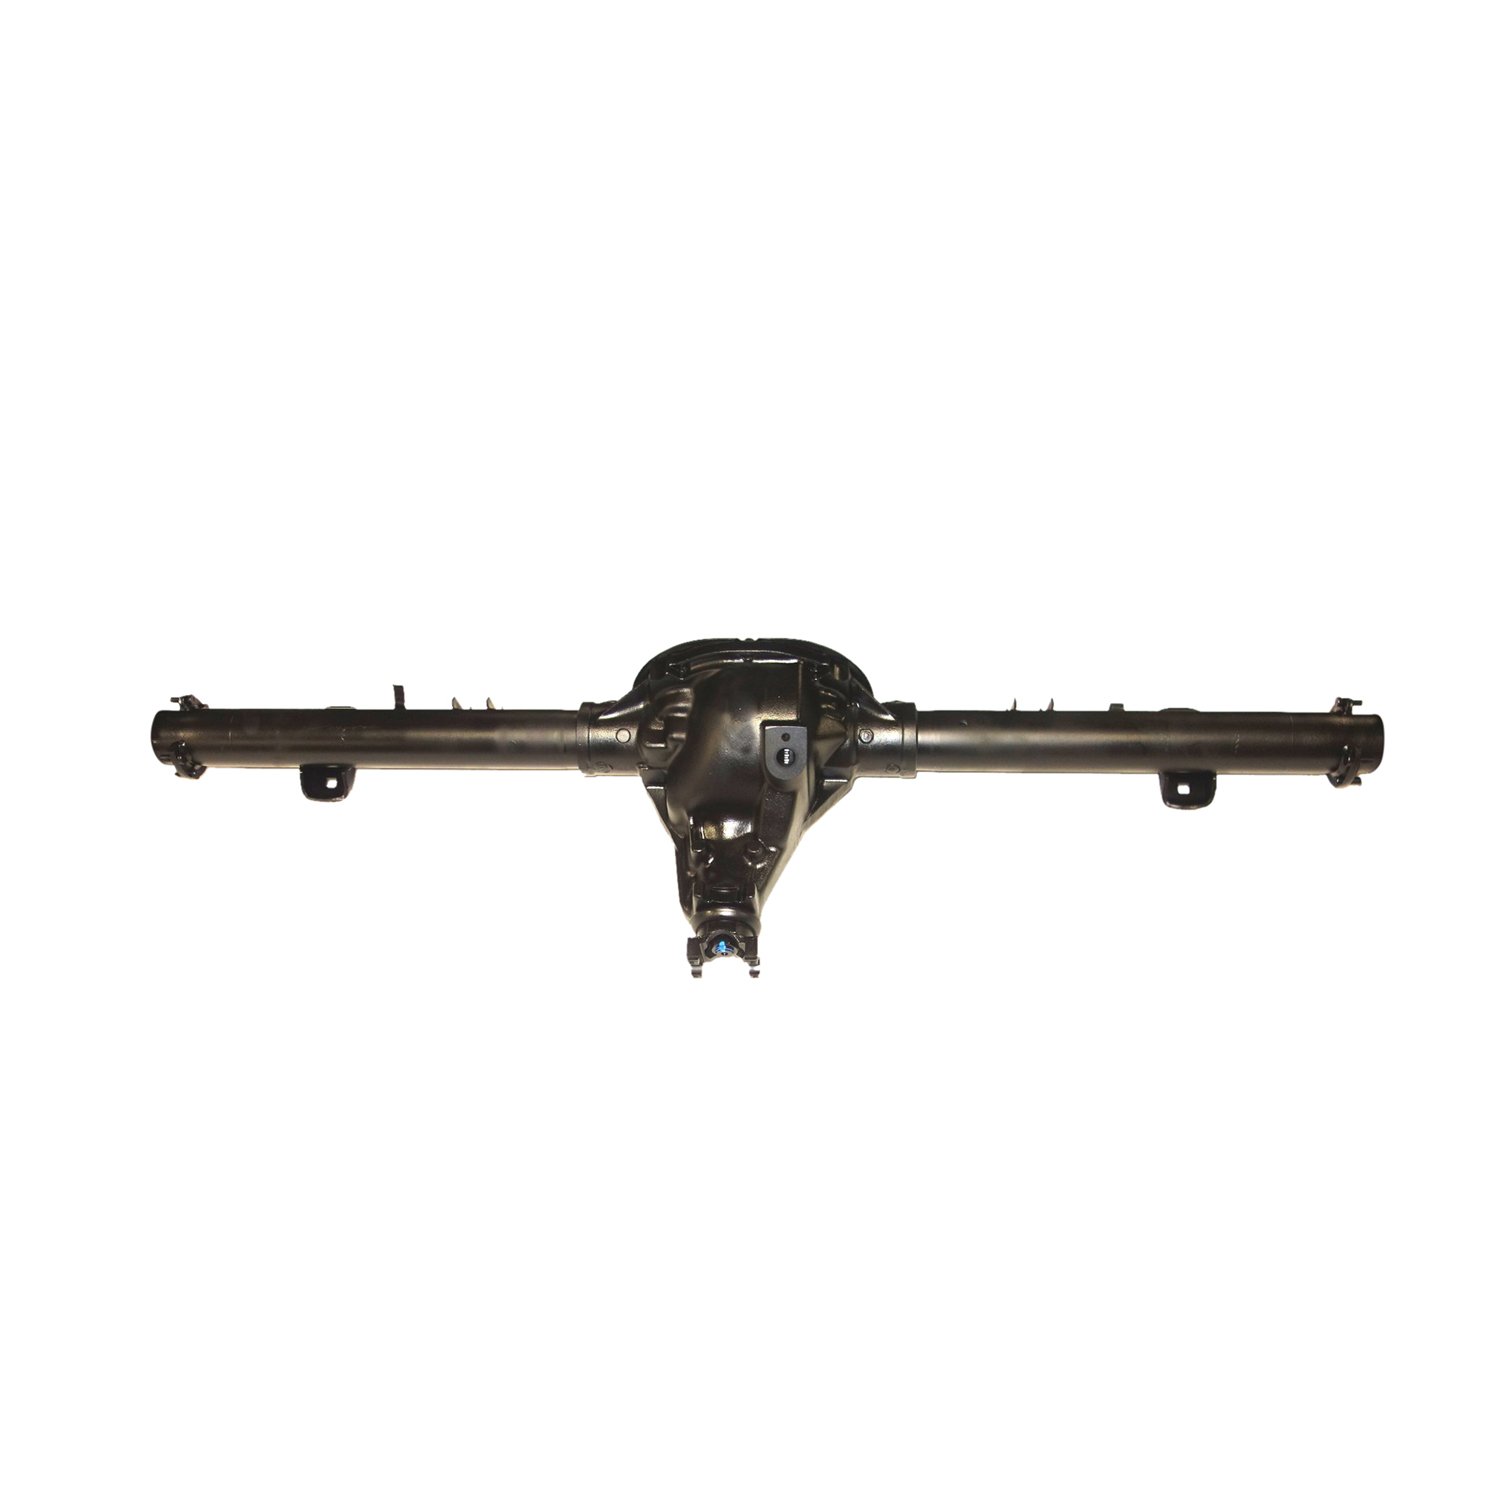 Remanufactured Axle Assy for Chy 8.25" 1989 1/2 Ton, D100, D150 2.71, 2wd, Posi LSD